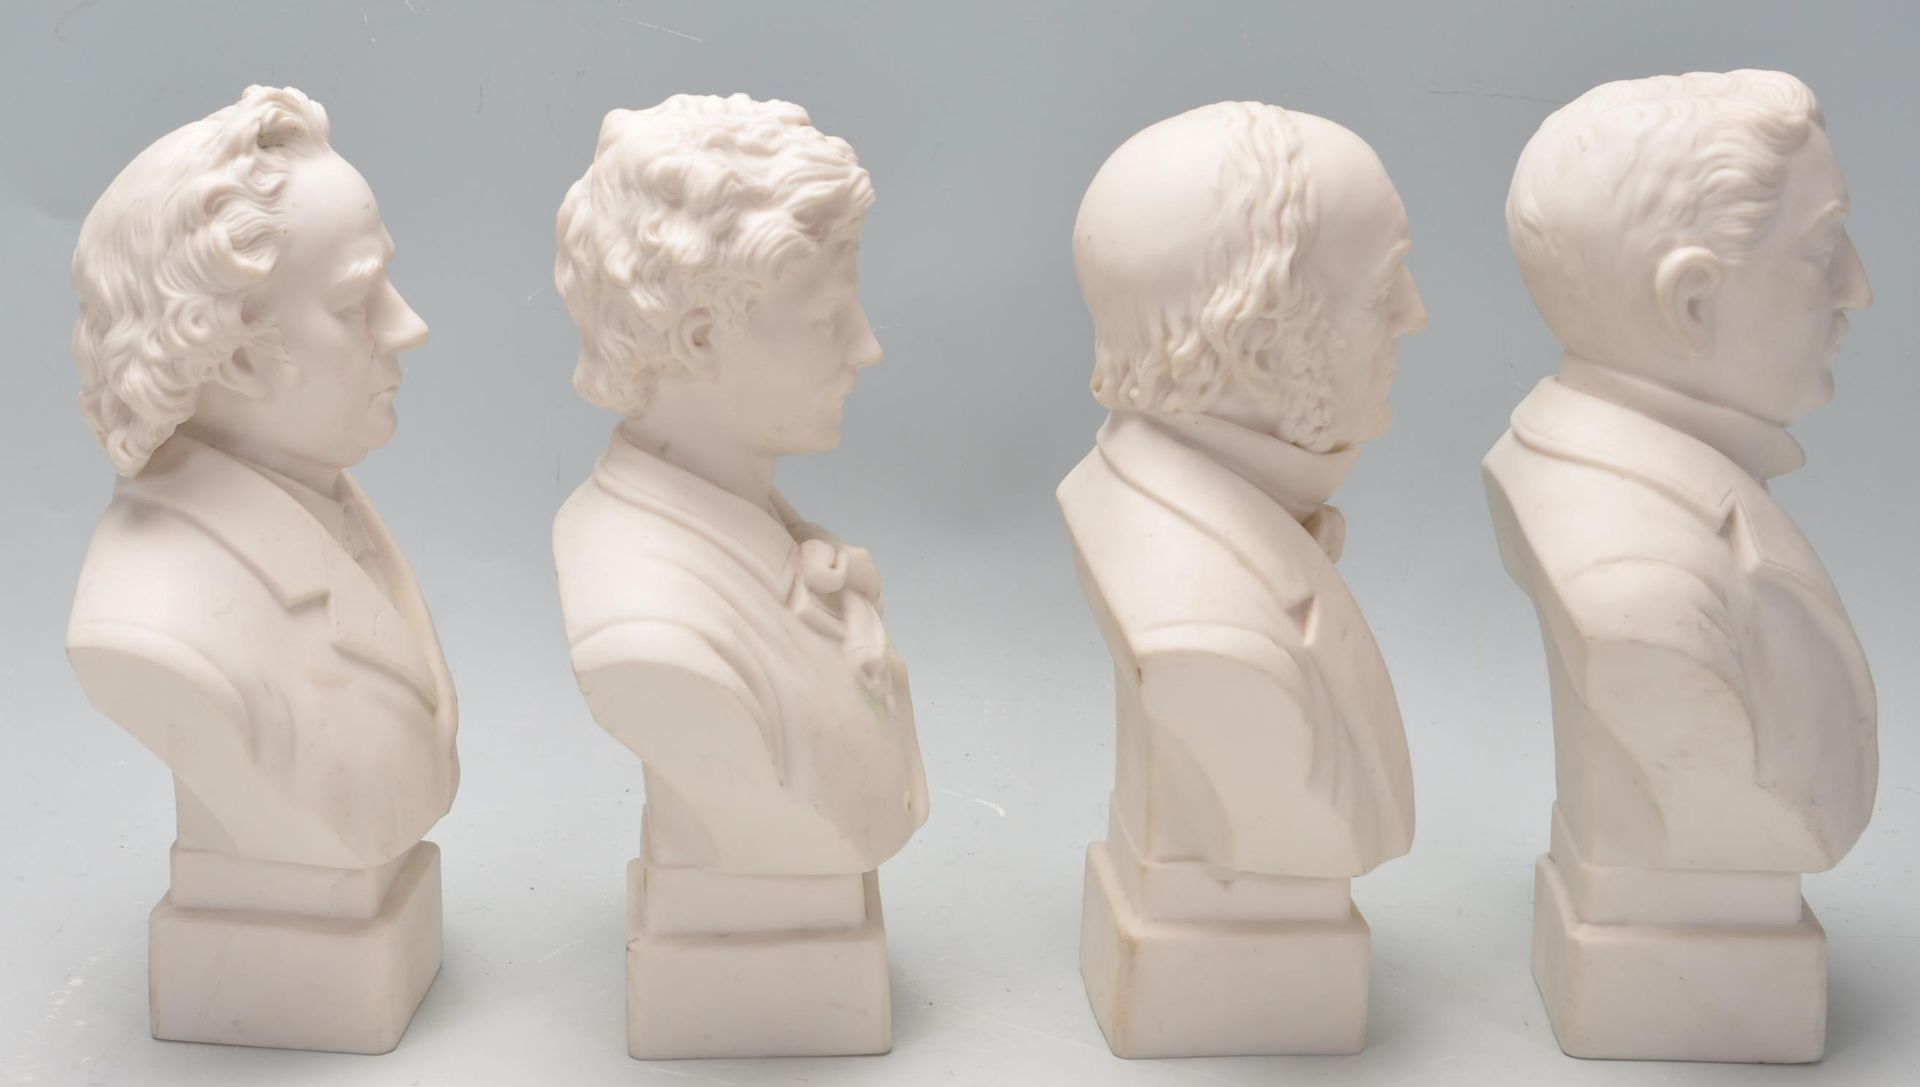 FOUR 20TH CENTURY BISQUE BUST FIGURINES